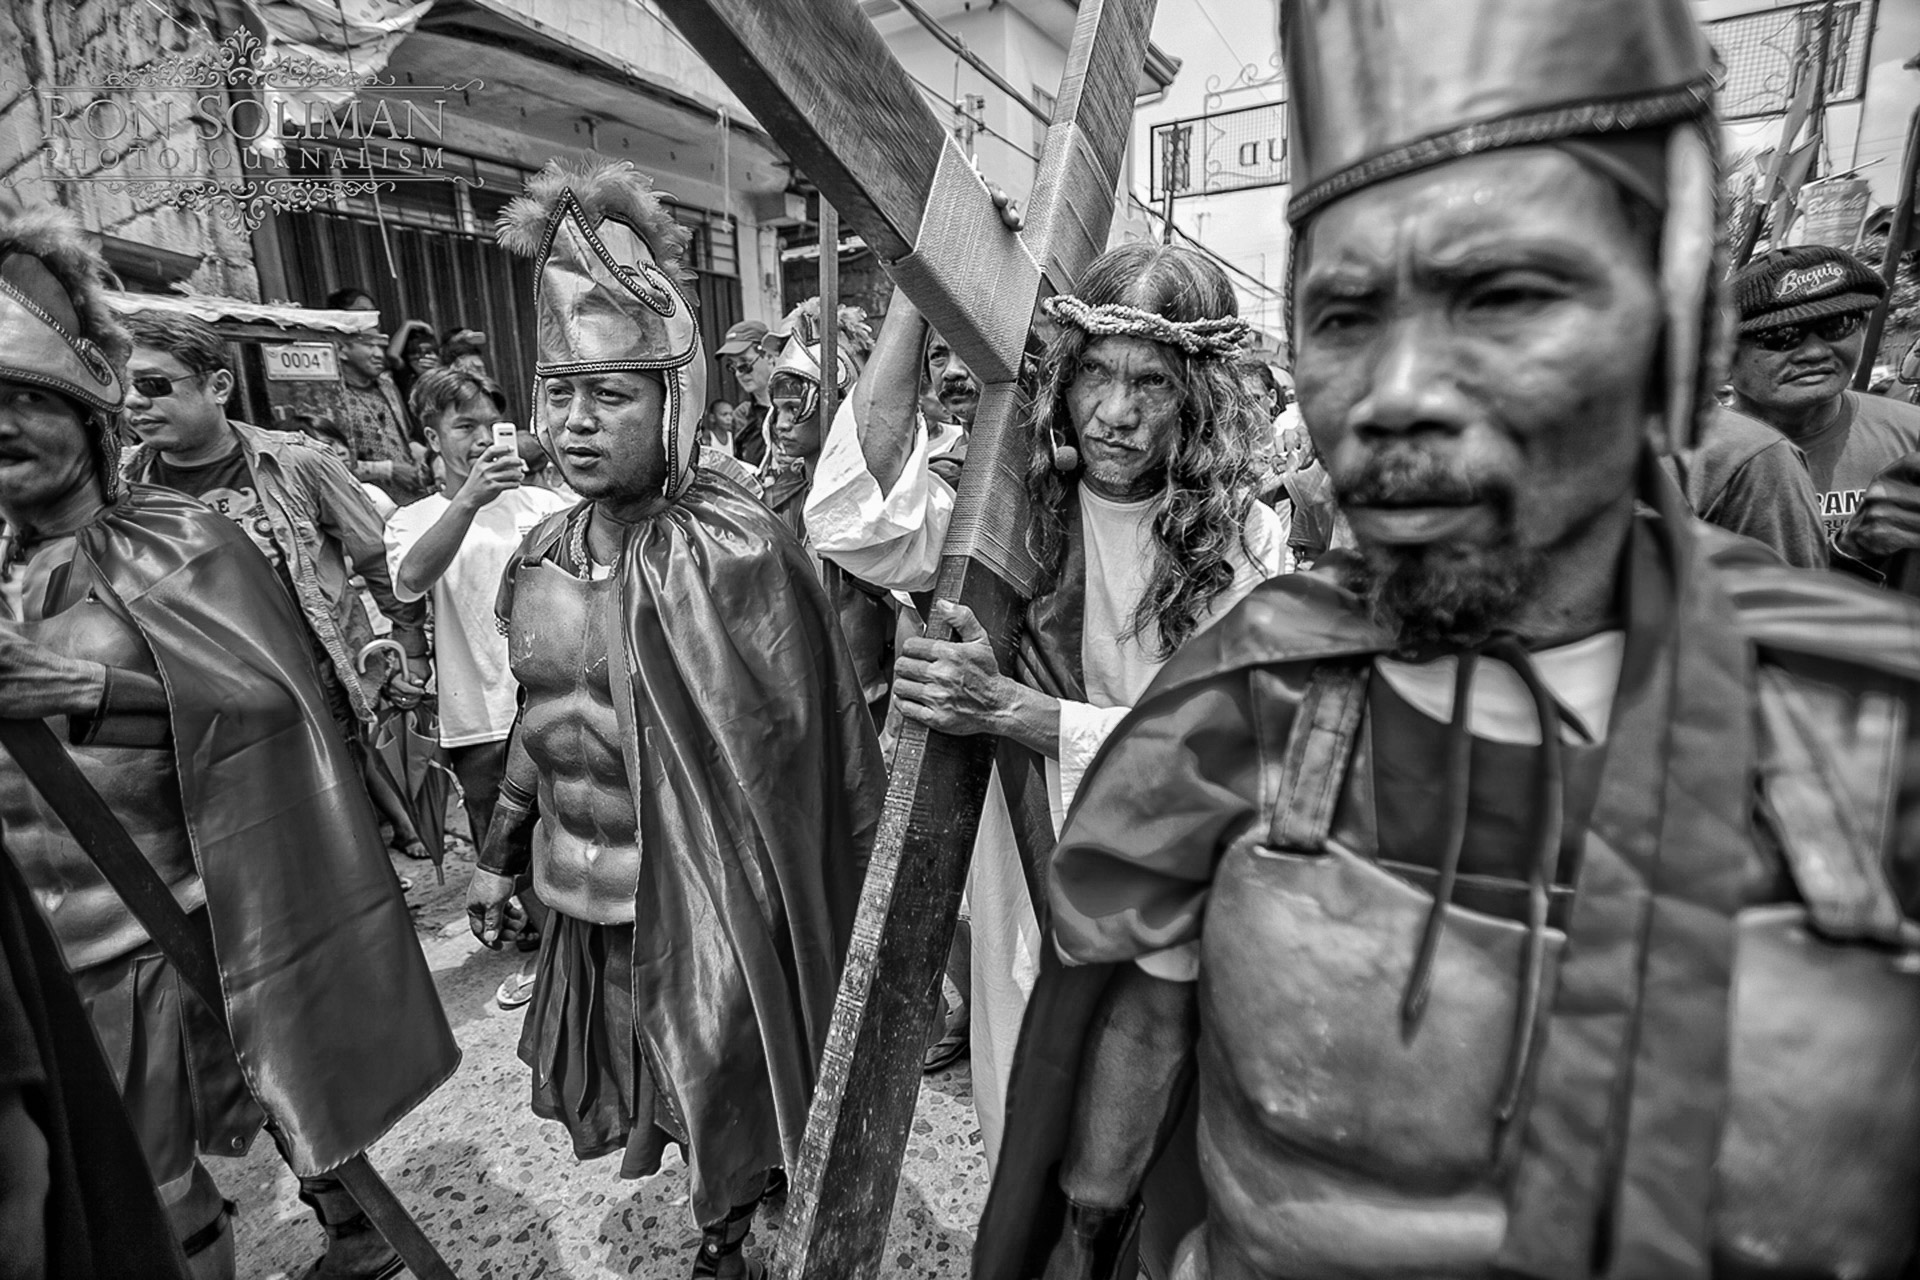 Good Friday Crucifixions photos in the Philippines